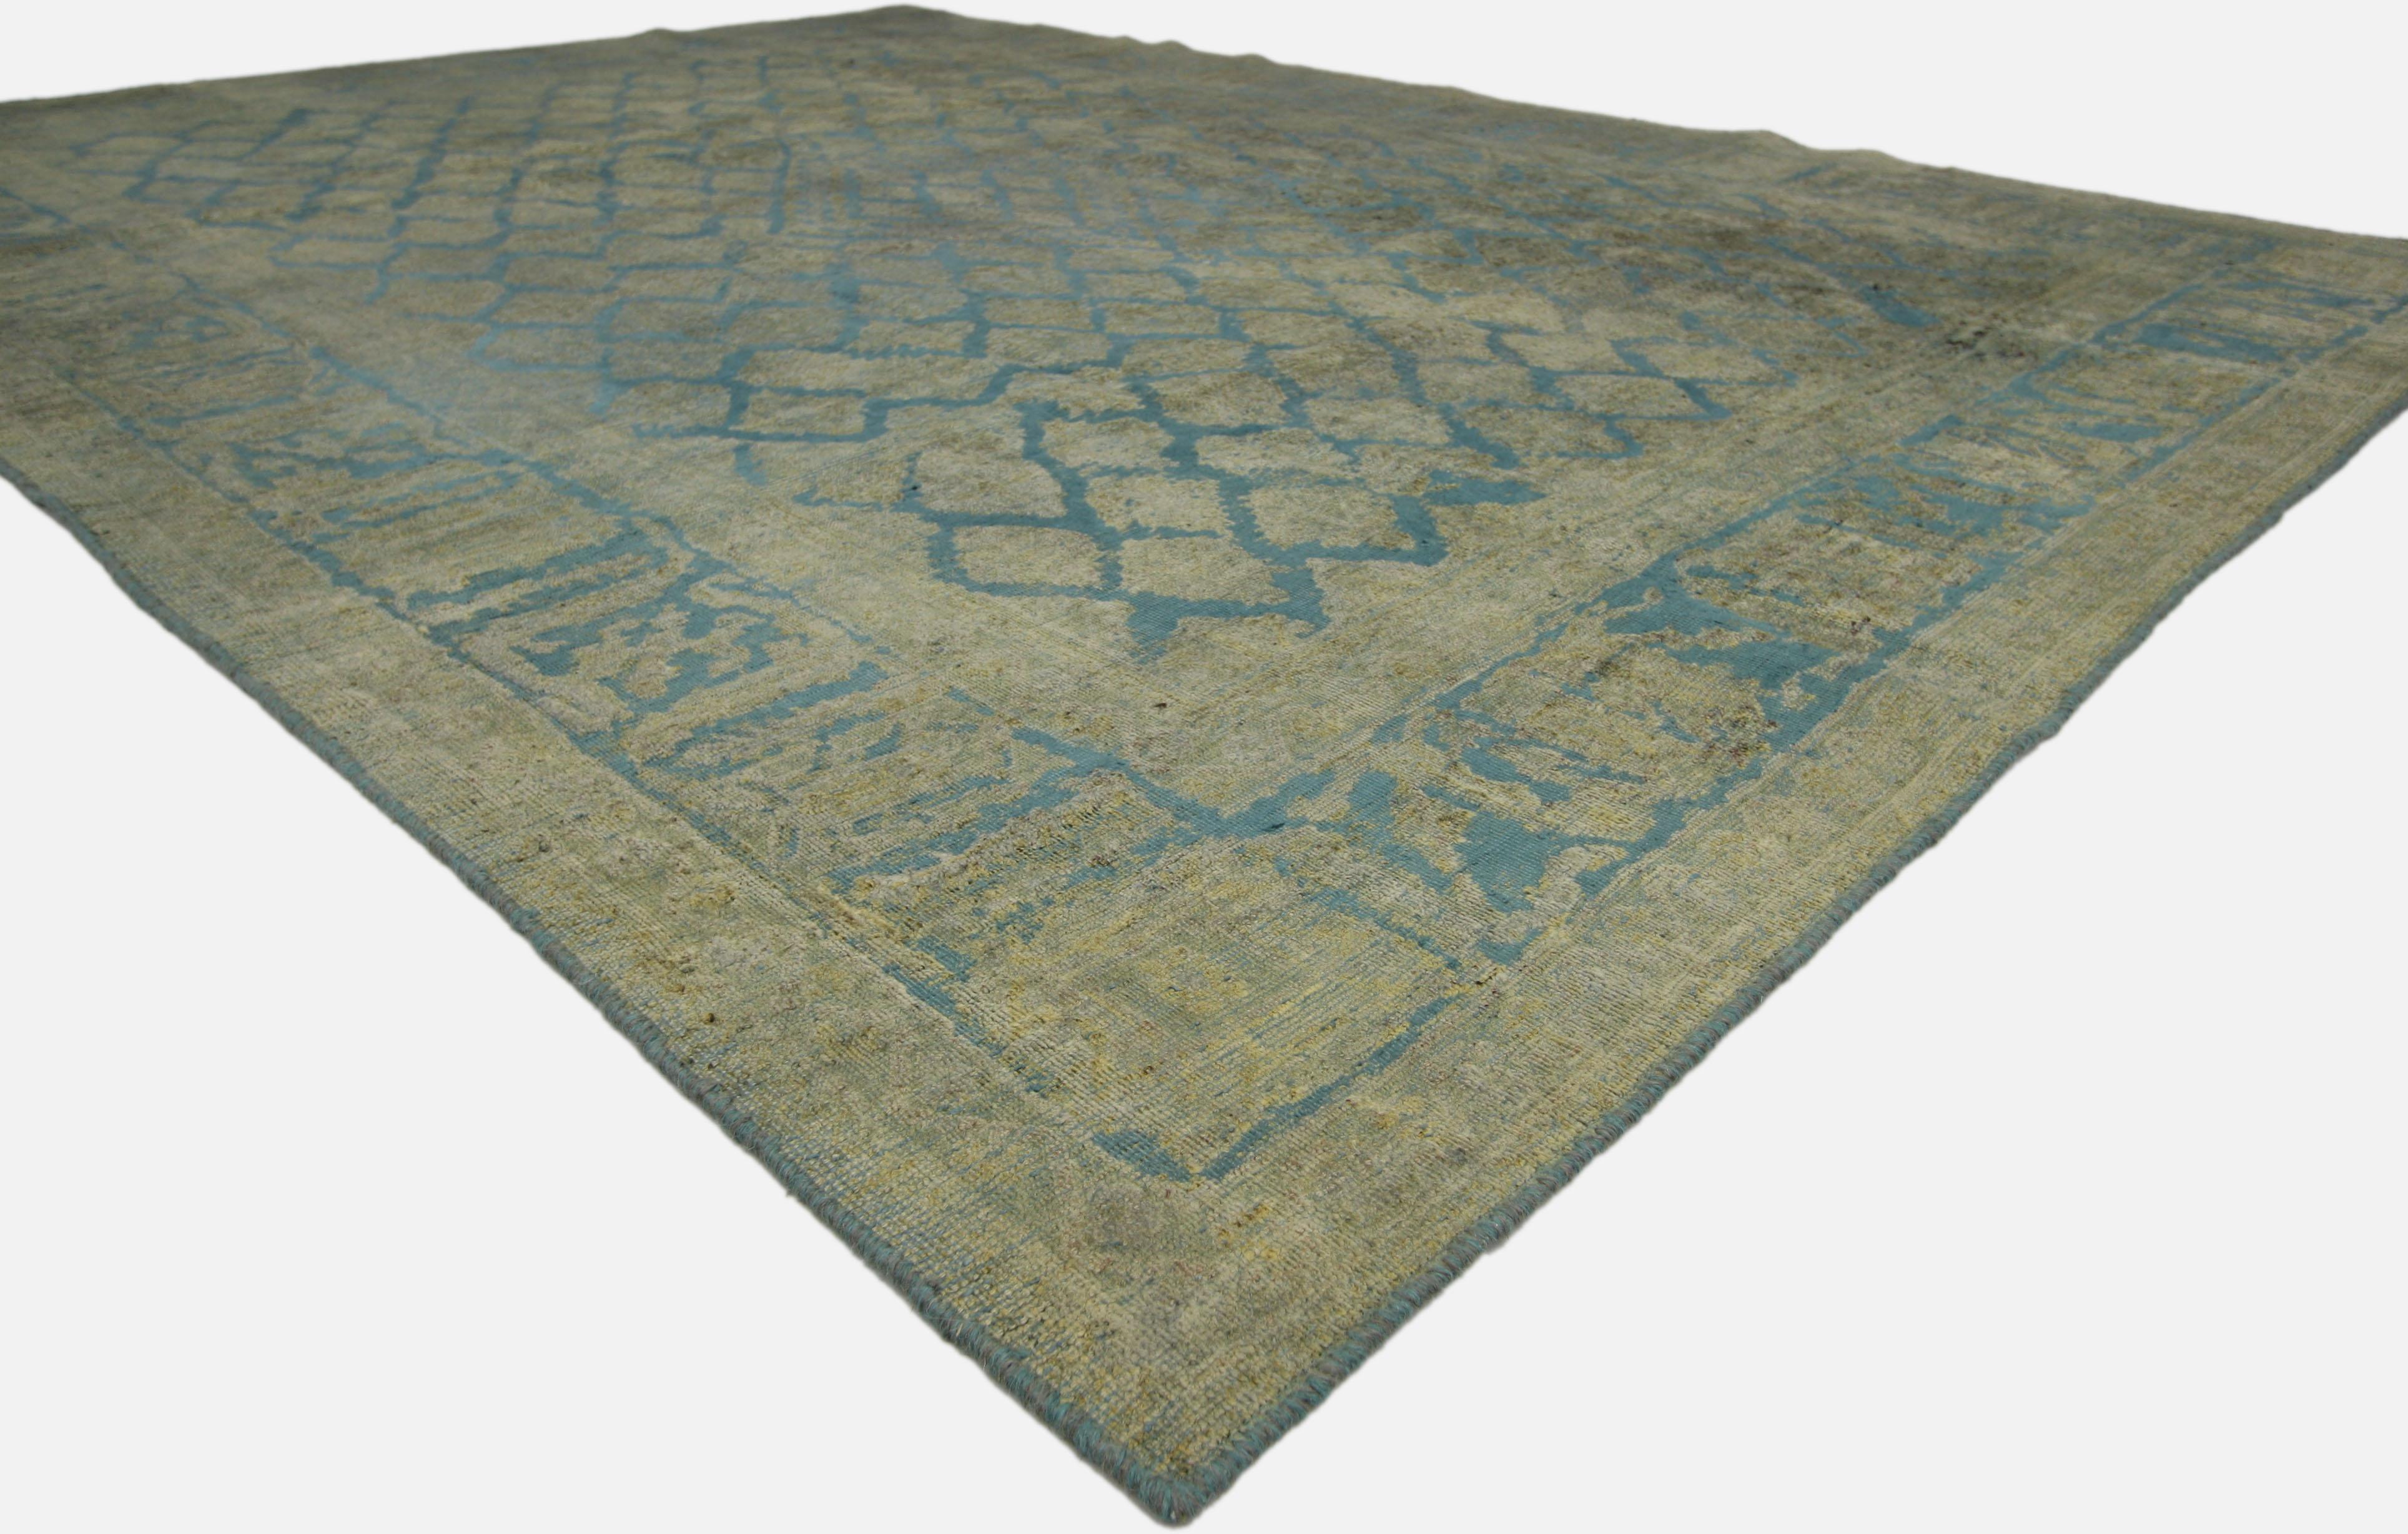 60721 Vintage Turkish Overdyed Rug, 07'10 x 10'10. 

Crafted with meticulous attention to detail, the hand-knotted wool vintage Turkish overdyed rug stands as a captivating fusion of timeless craftsmanship and biophilic design principles. This